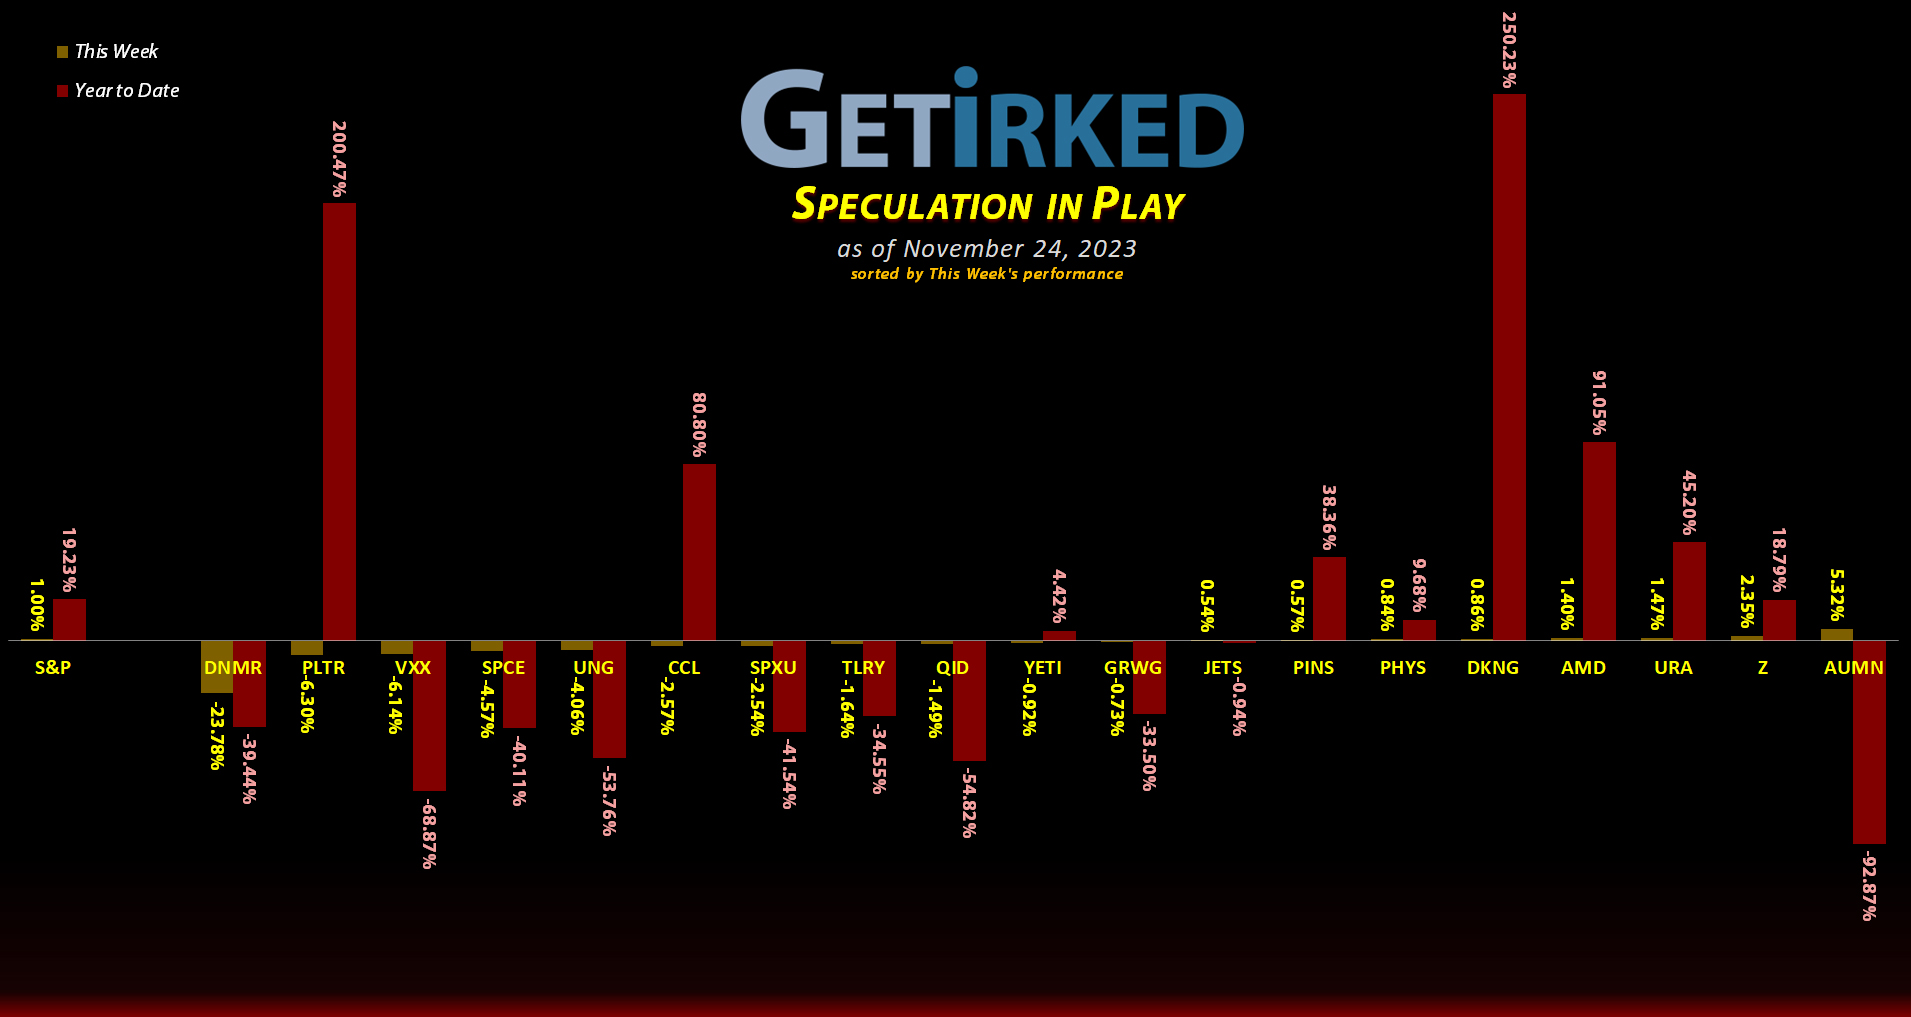 Get Irked's Speculation in Play - November 24, 2023